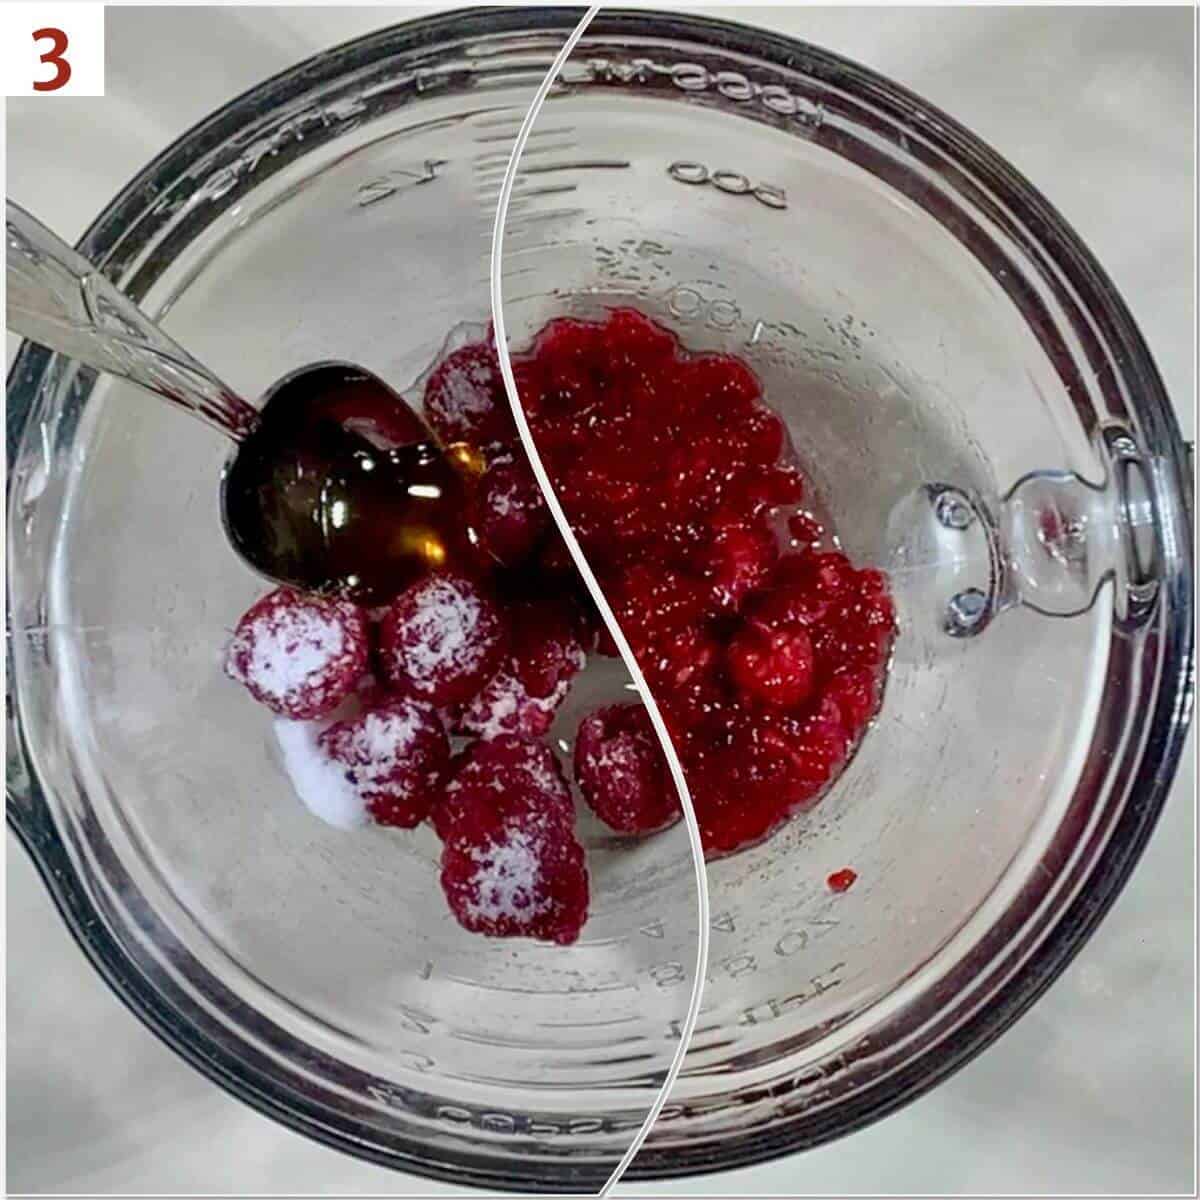 Collage of before and after macerating raspberries.